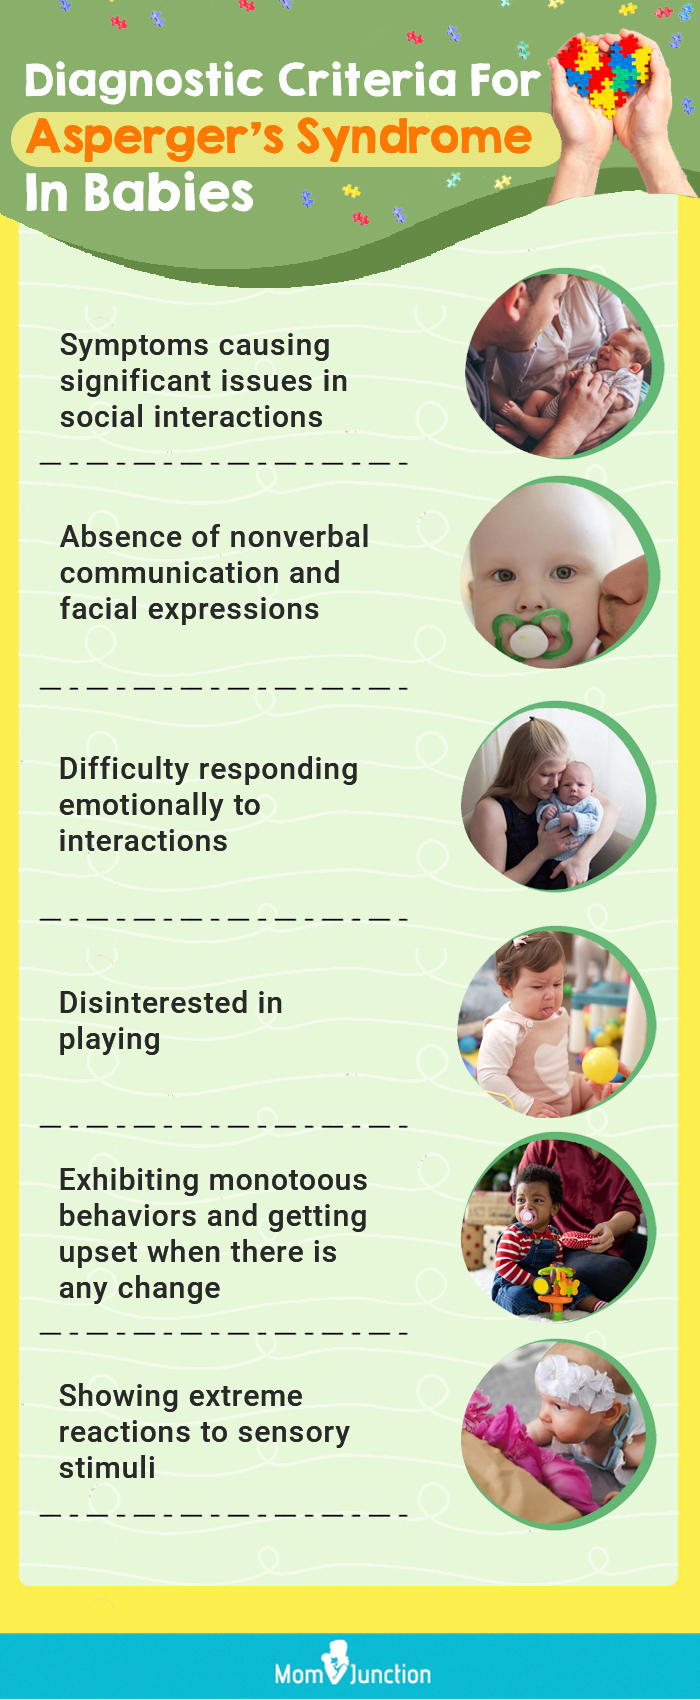 diagnostic criteria for aspergers syndrome in babies (infographic)